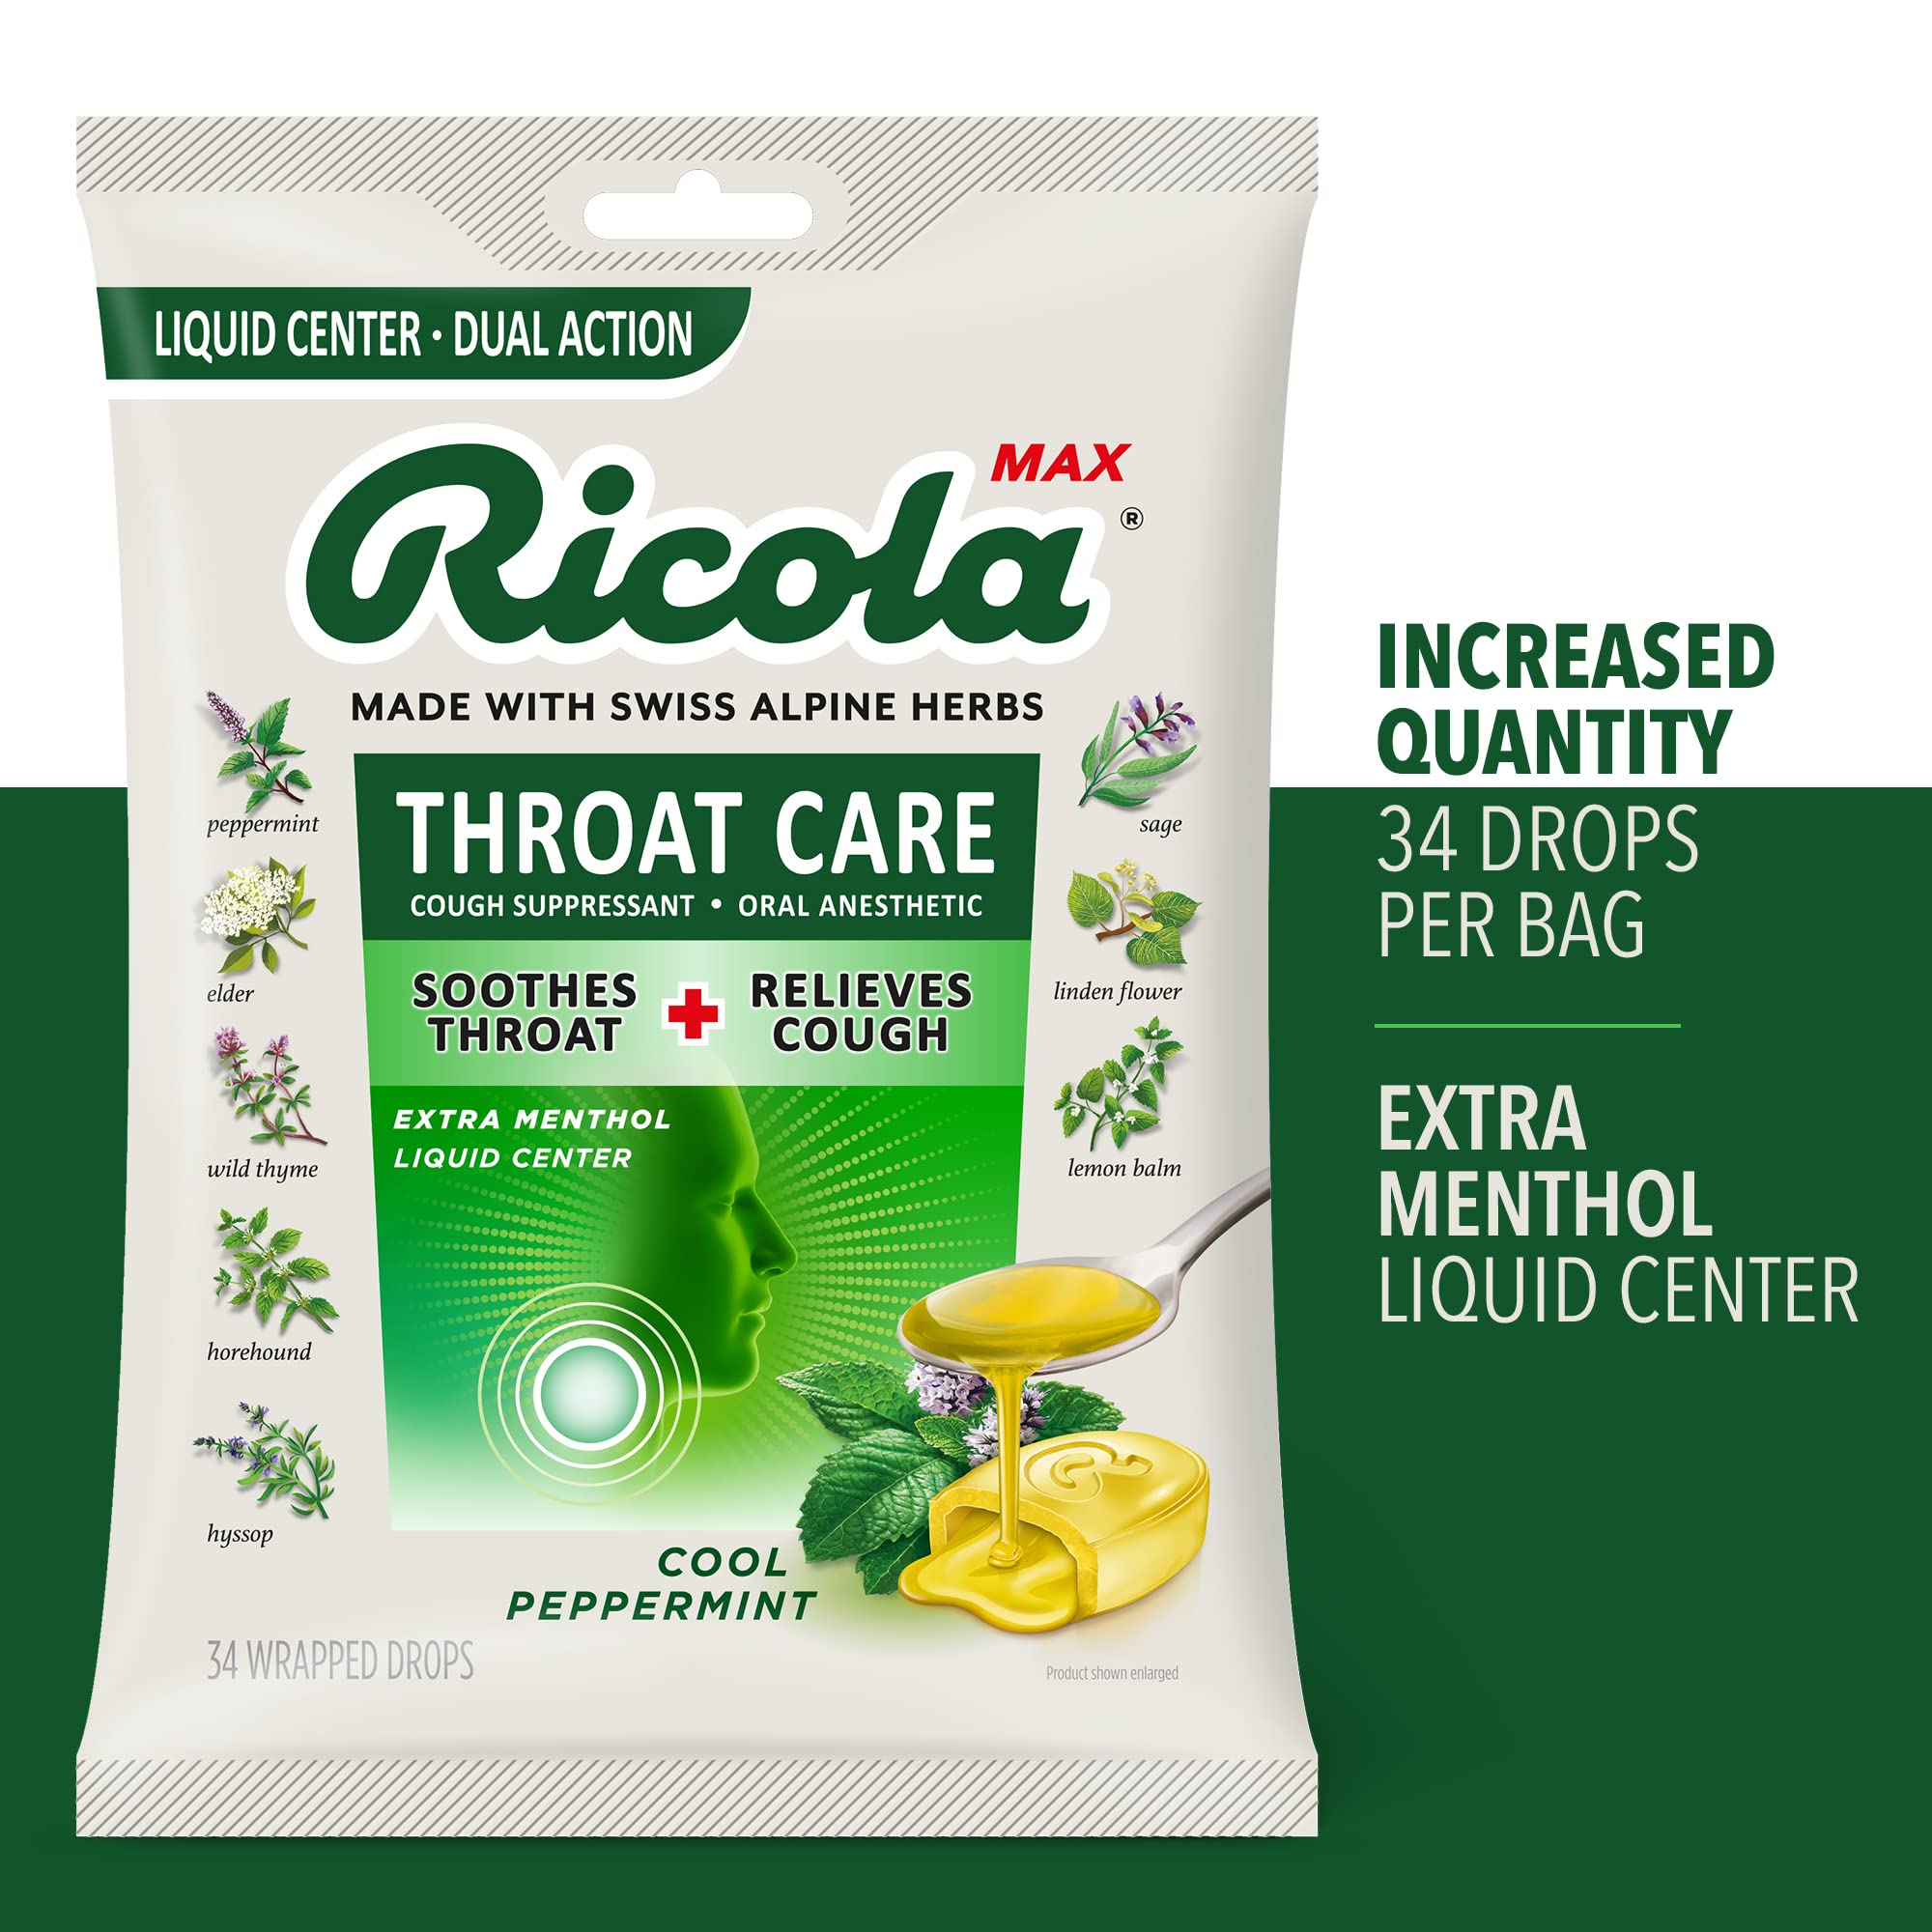 Ricola Max Throat Care Cool Peppermint Large Bags | Cough Suppressant Drops | Dual Action Liquid Center | Soothing Long-Lasting Relief - 34 Count (Pack of 2)